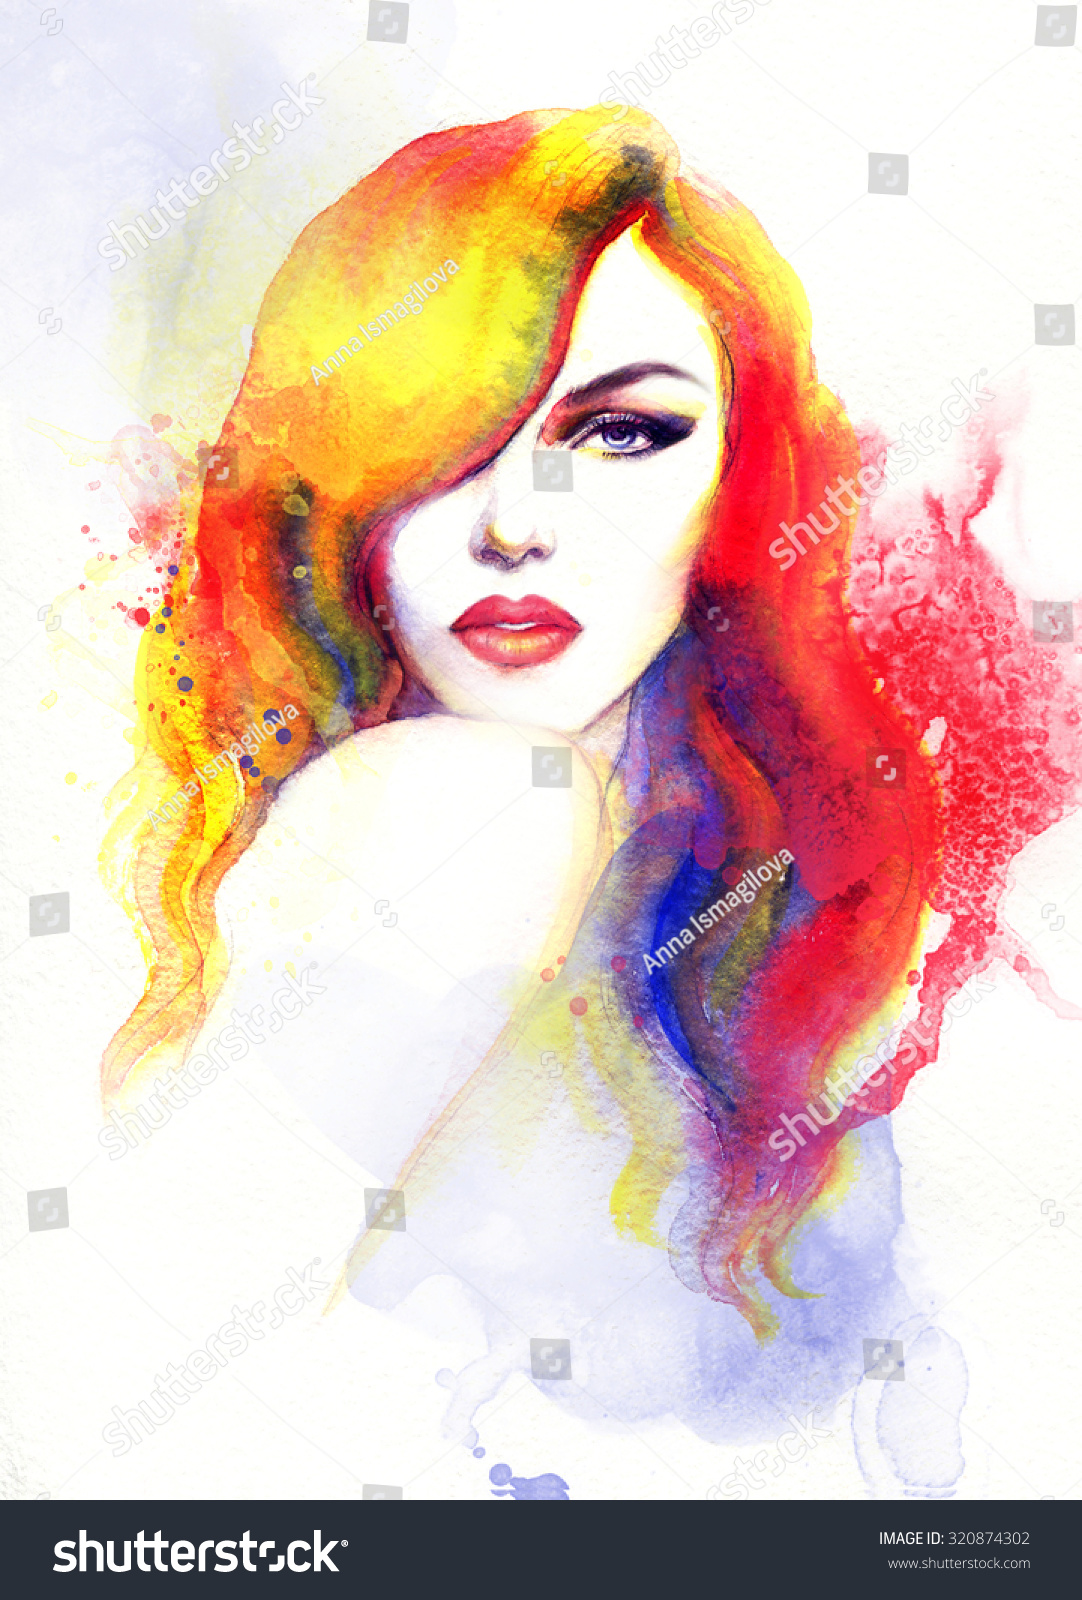 Woman Portrait Abstract Watercolor Fashion Background Stock Illustration 320874302 Shutterstock